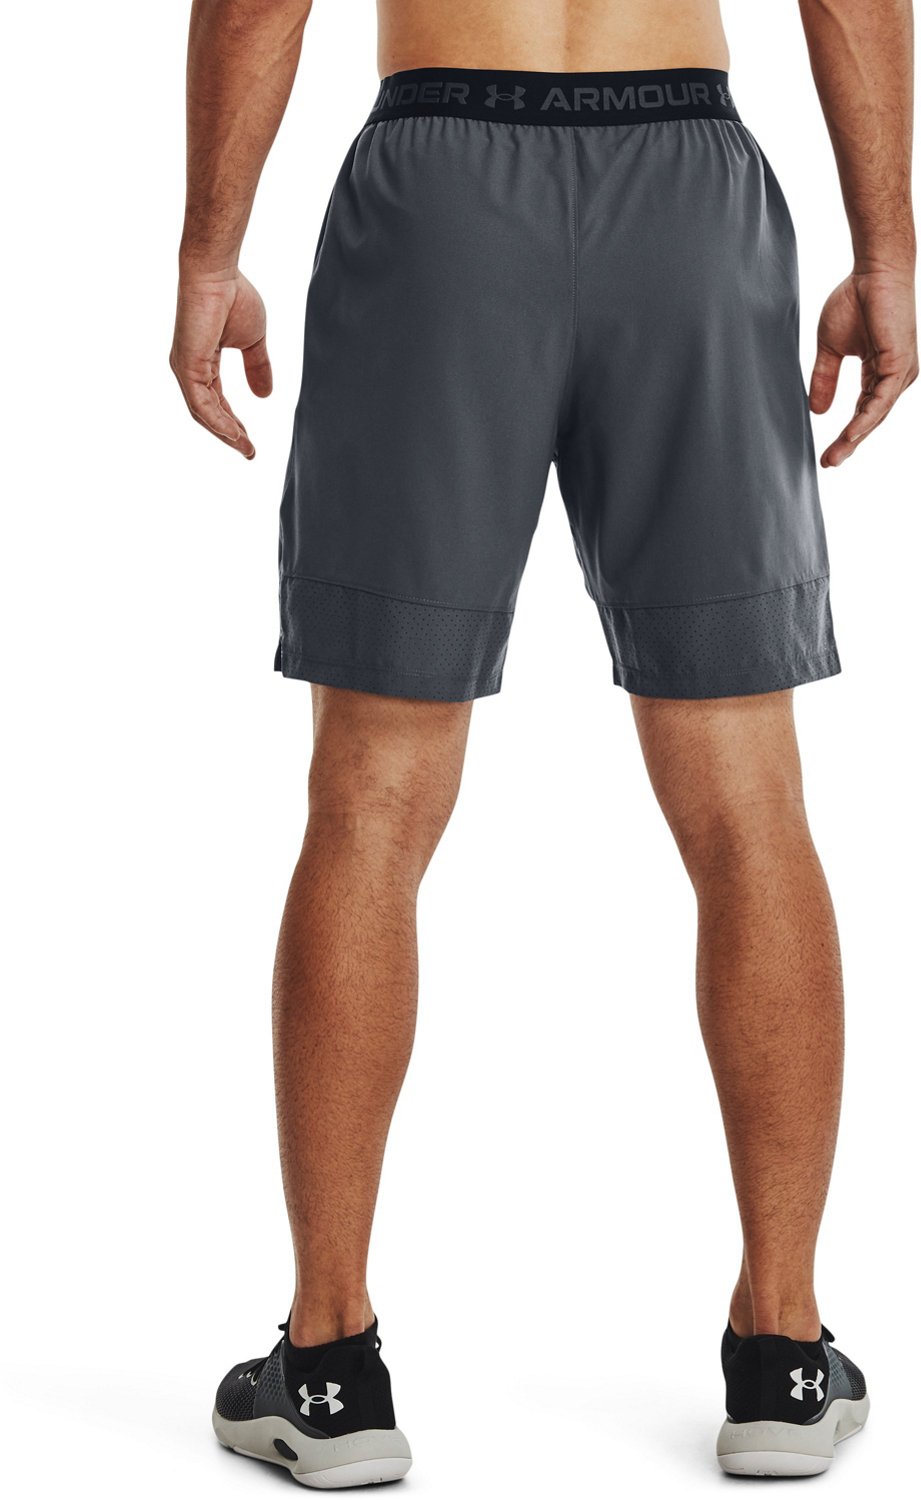 Under Armour Men's Vanish Woven Shorts | Free Shipping at Academy